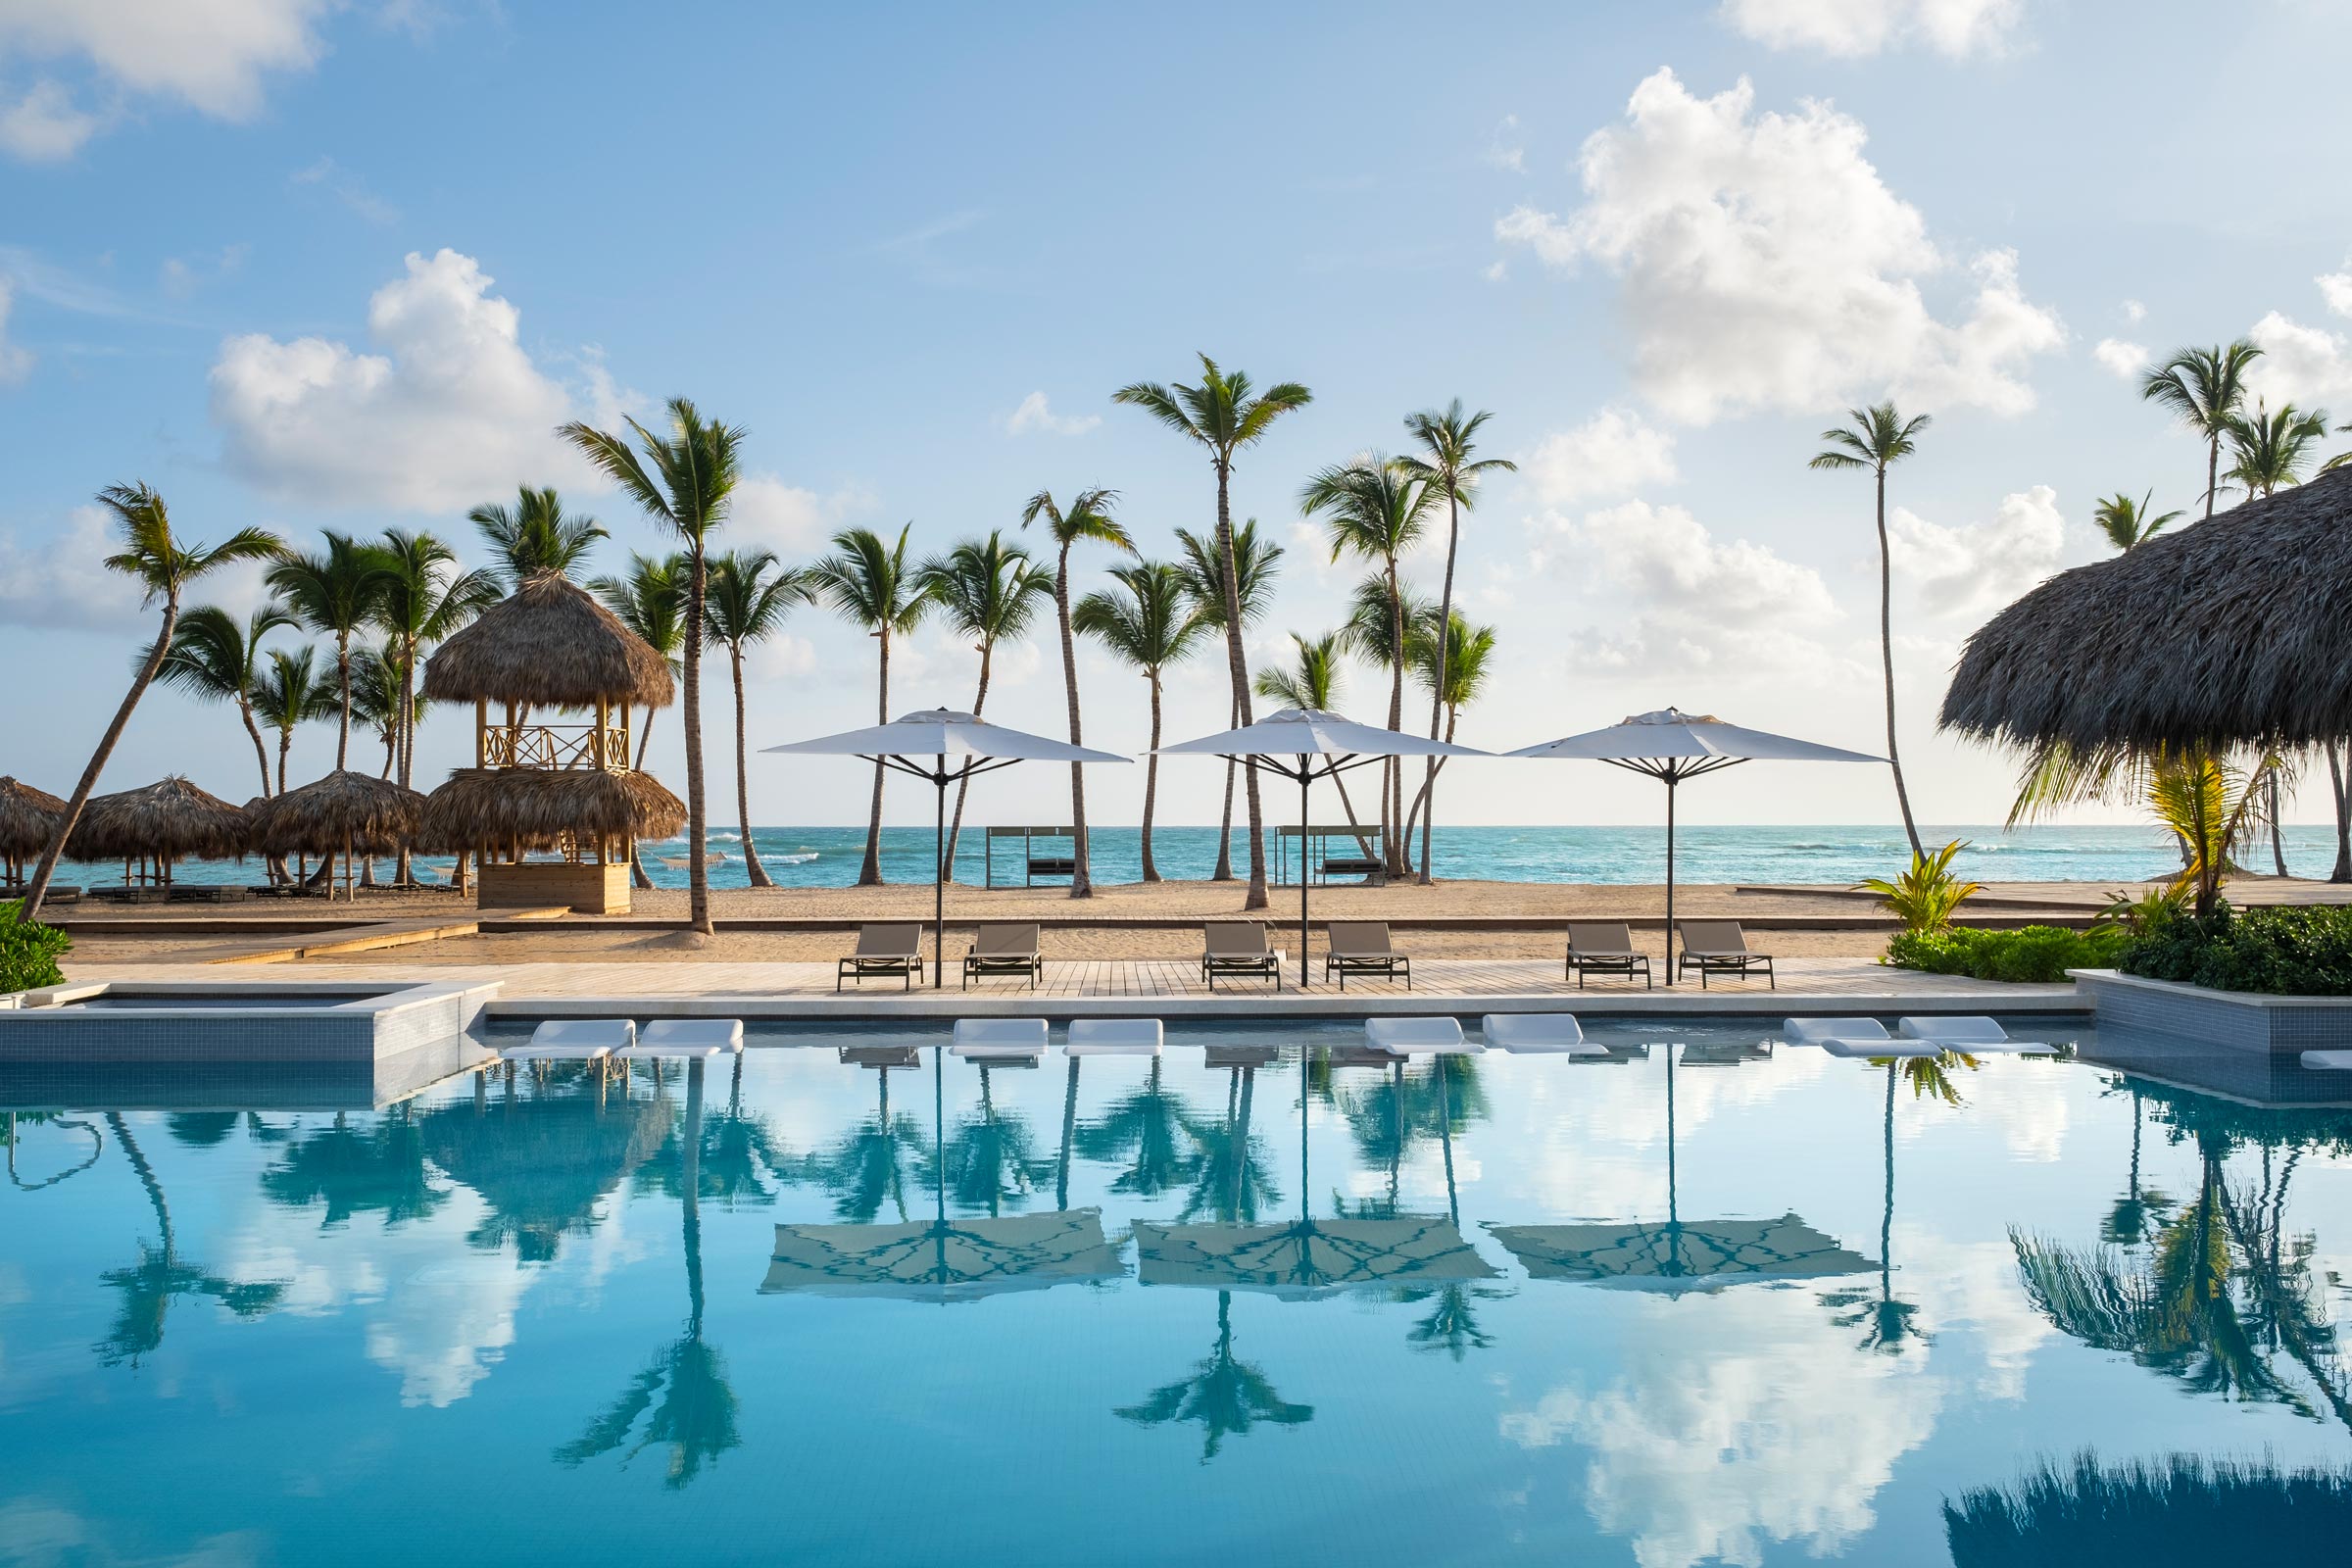 Pool overlooking the ocean in Finest Punta Cana